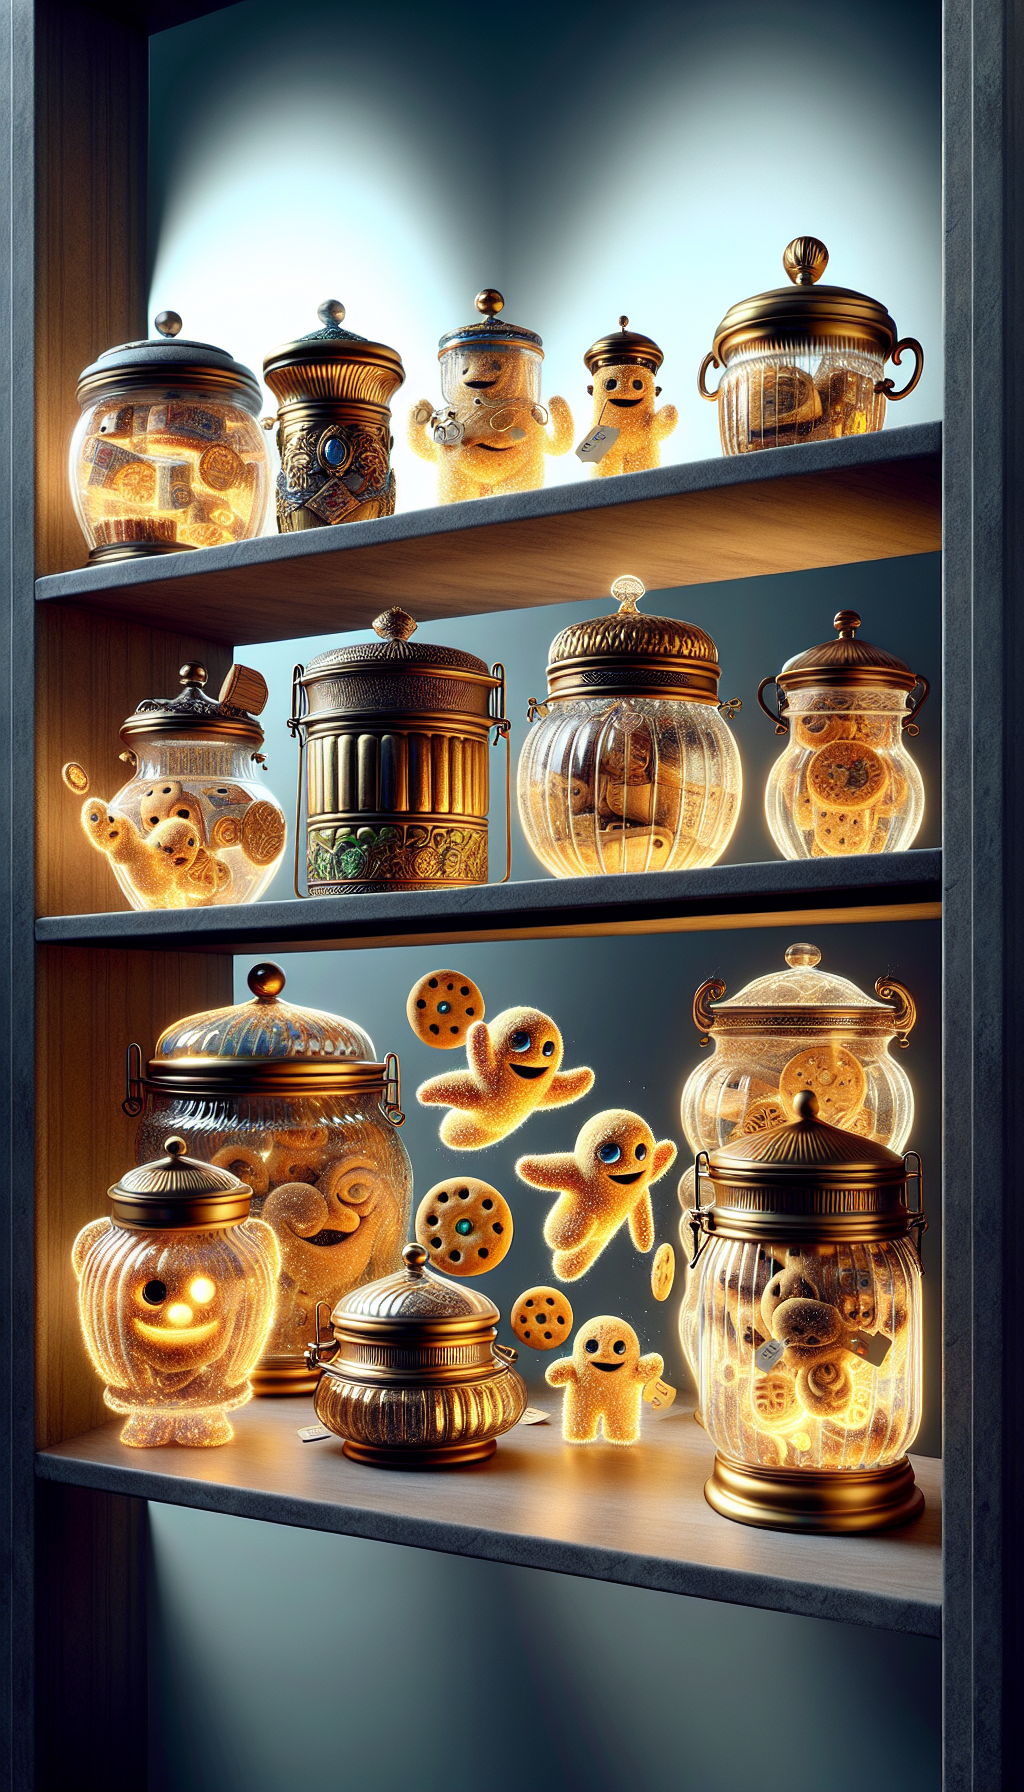 A whimsical cross-section illustration of an antique cookie jar shelf, with jars ranging from Victorian to Art Deco styles, shimmering with a golden glow to signify their value. Each jar lid is ajar with playful, ethereal cookie sprites ascending, holding price tags and magnifying glasses, symbolizing the enchanting allure and the collector’s meticulous hunt for precious, valuable finds.